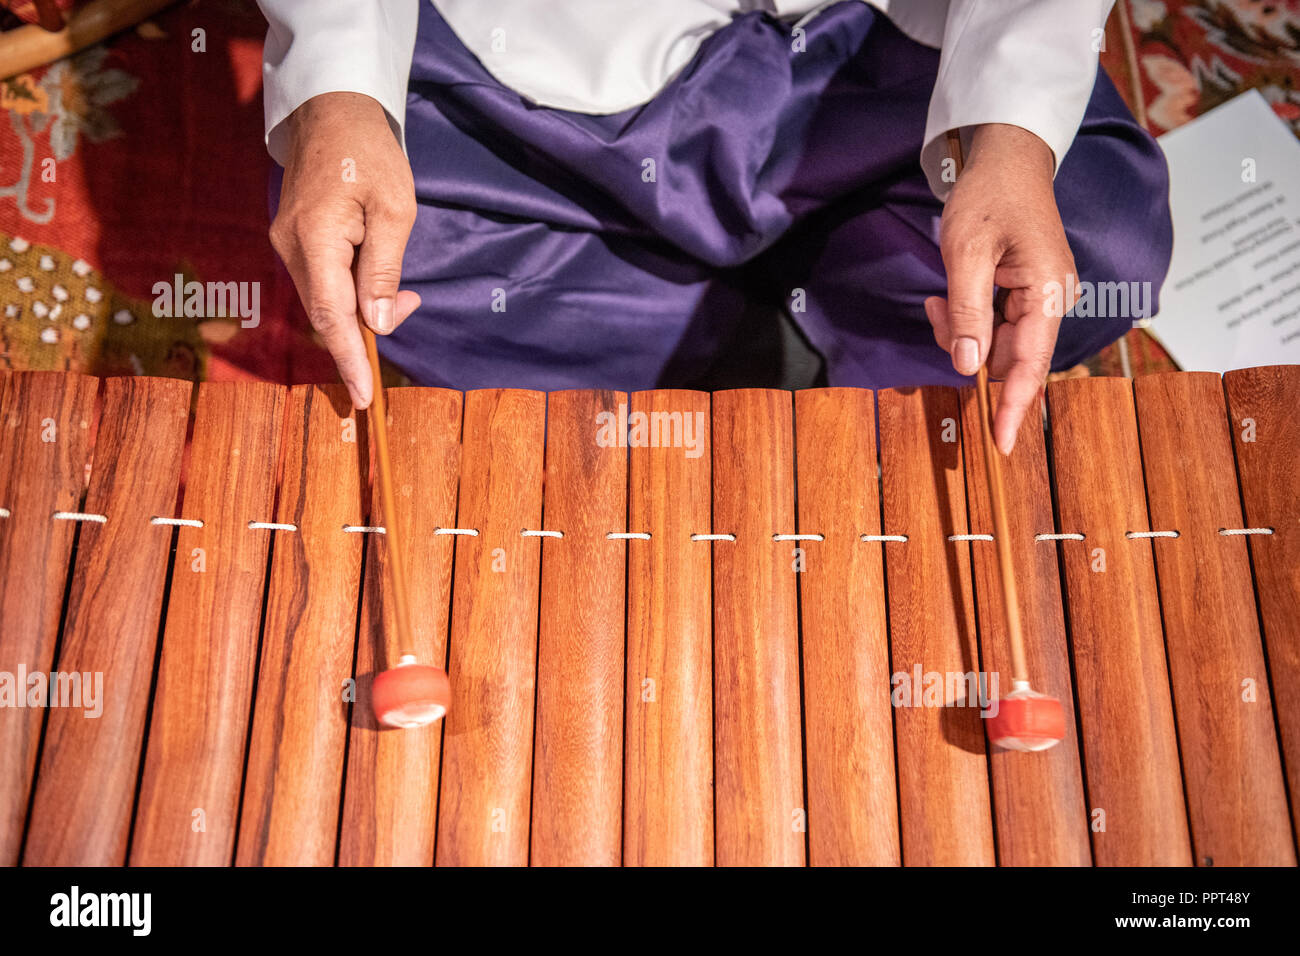 A man plays the Roneat Aek (Bamboo / wooden xylophone)  at a Cambodian New Year festival in Virginia Stock Photo